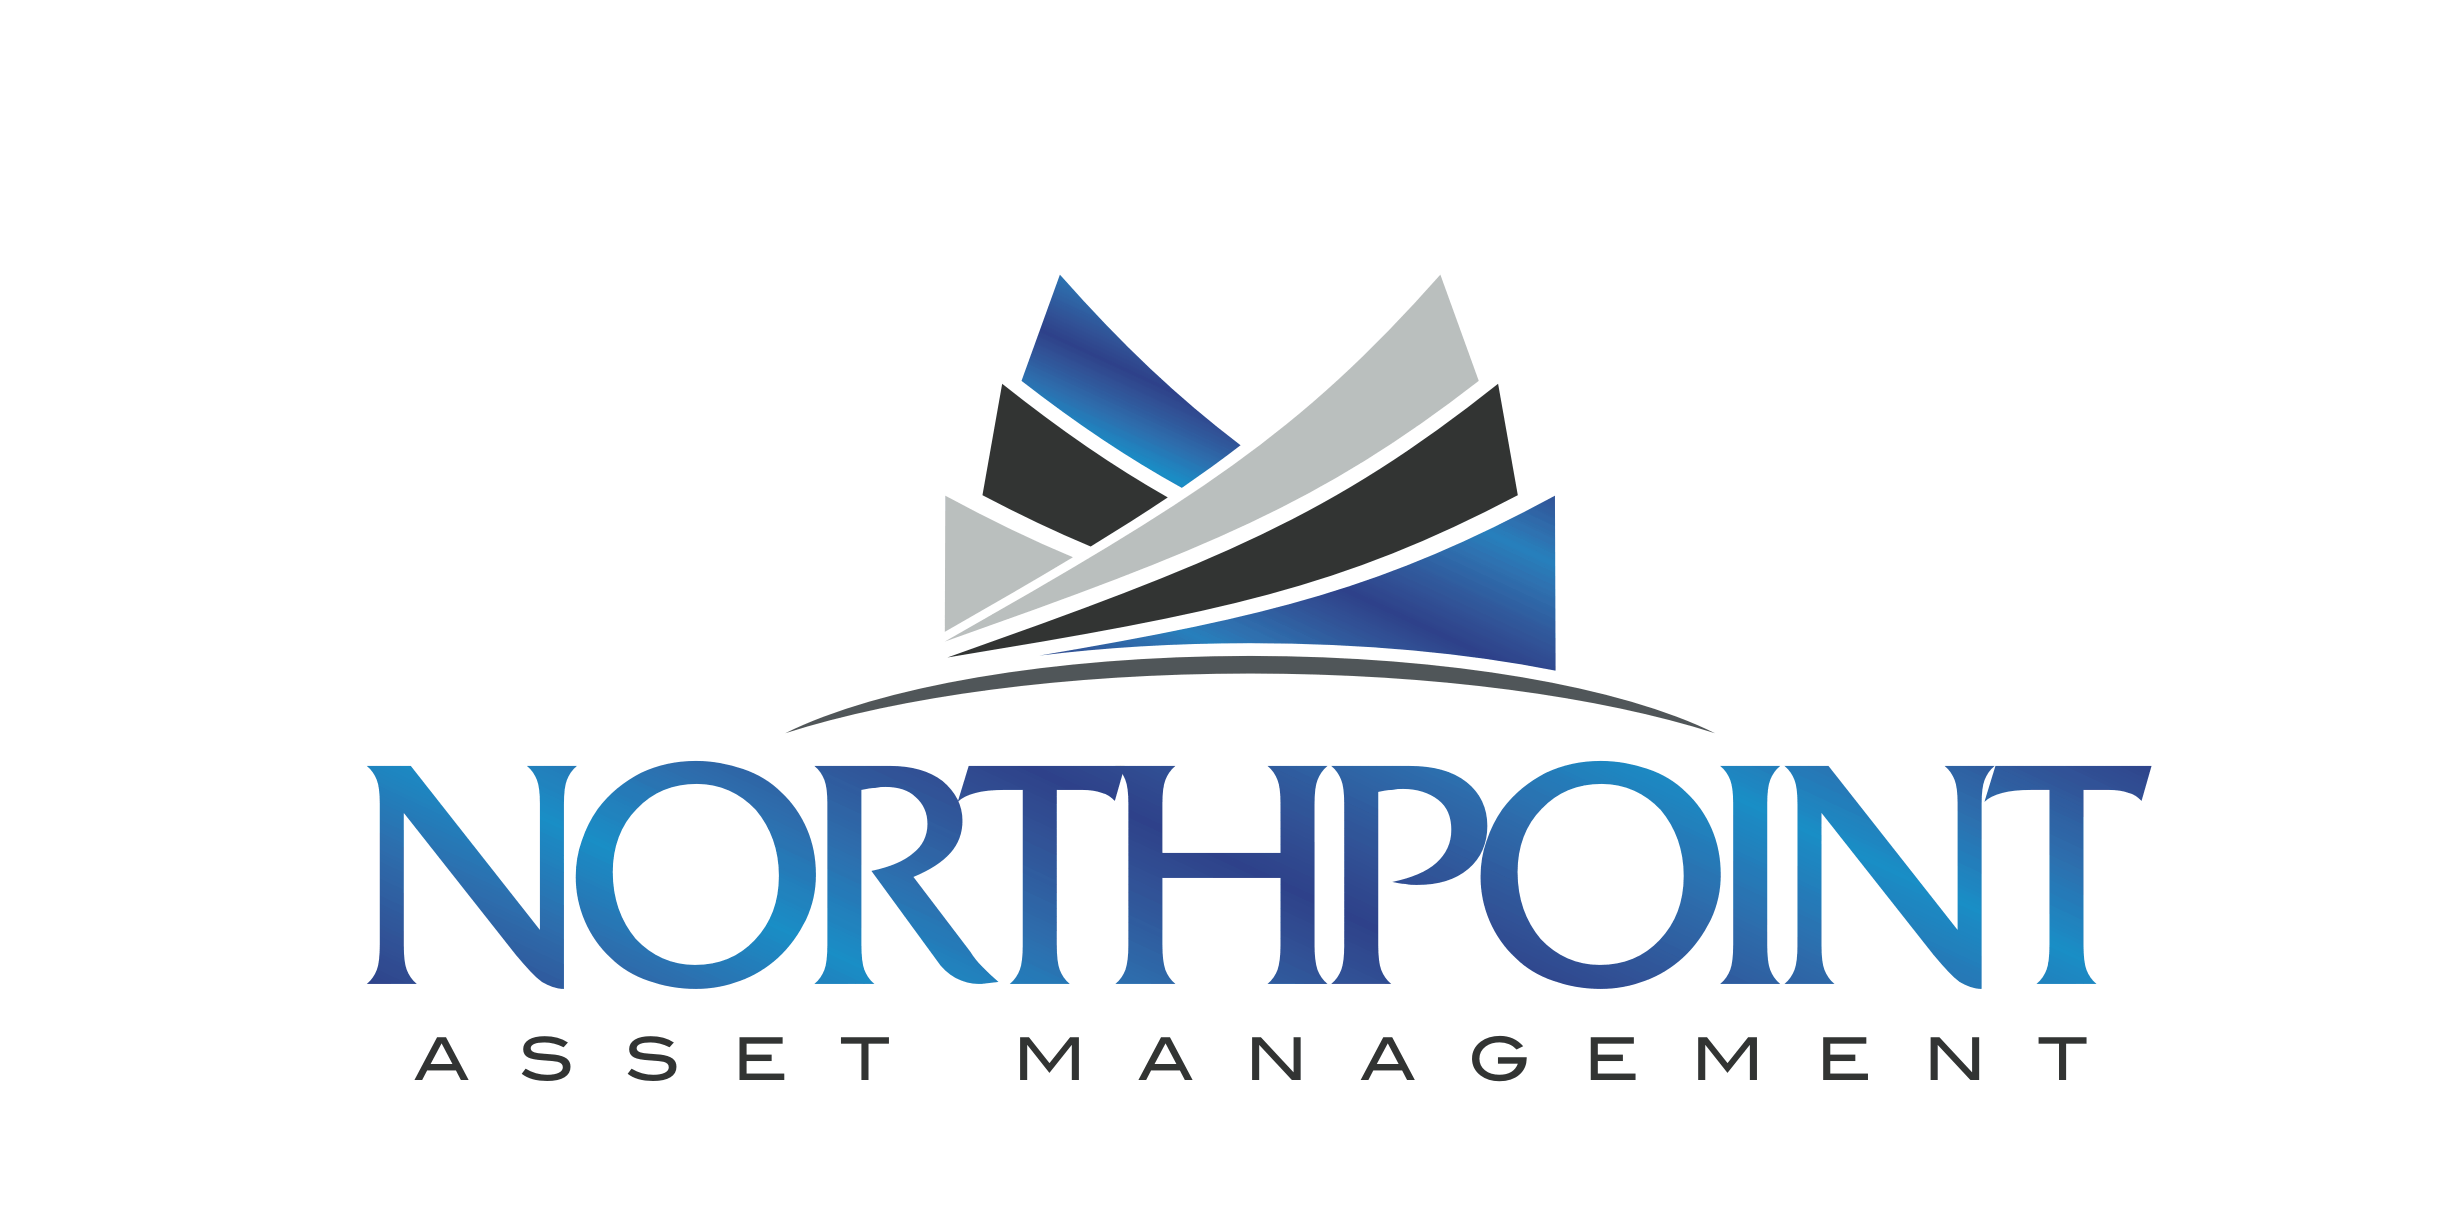 Northpoint Asset Management - Baltimore-Columbia-Towson, MD logo